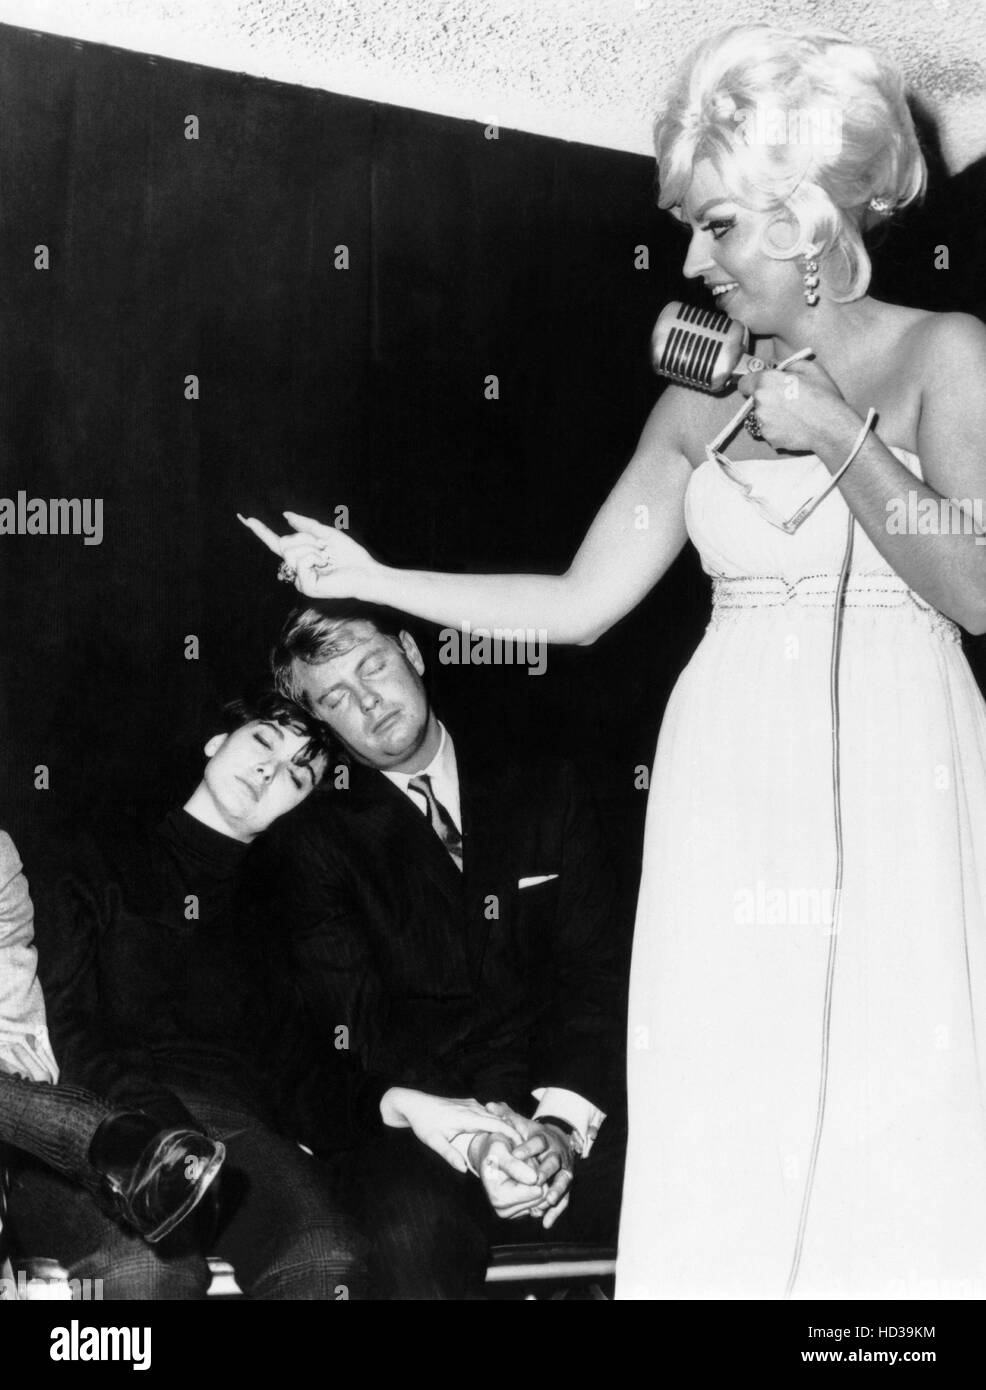 Suzanne Pleshette, left, and Troy Donahue, being hypnotized by nightclub performer Pat Collins, December 22, 1963 Stock Photo